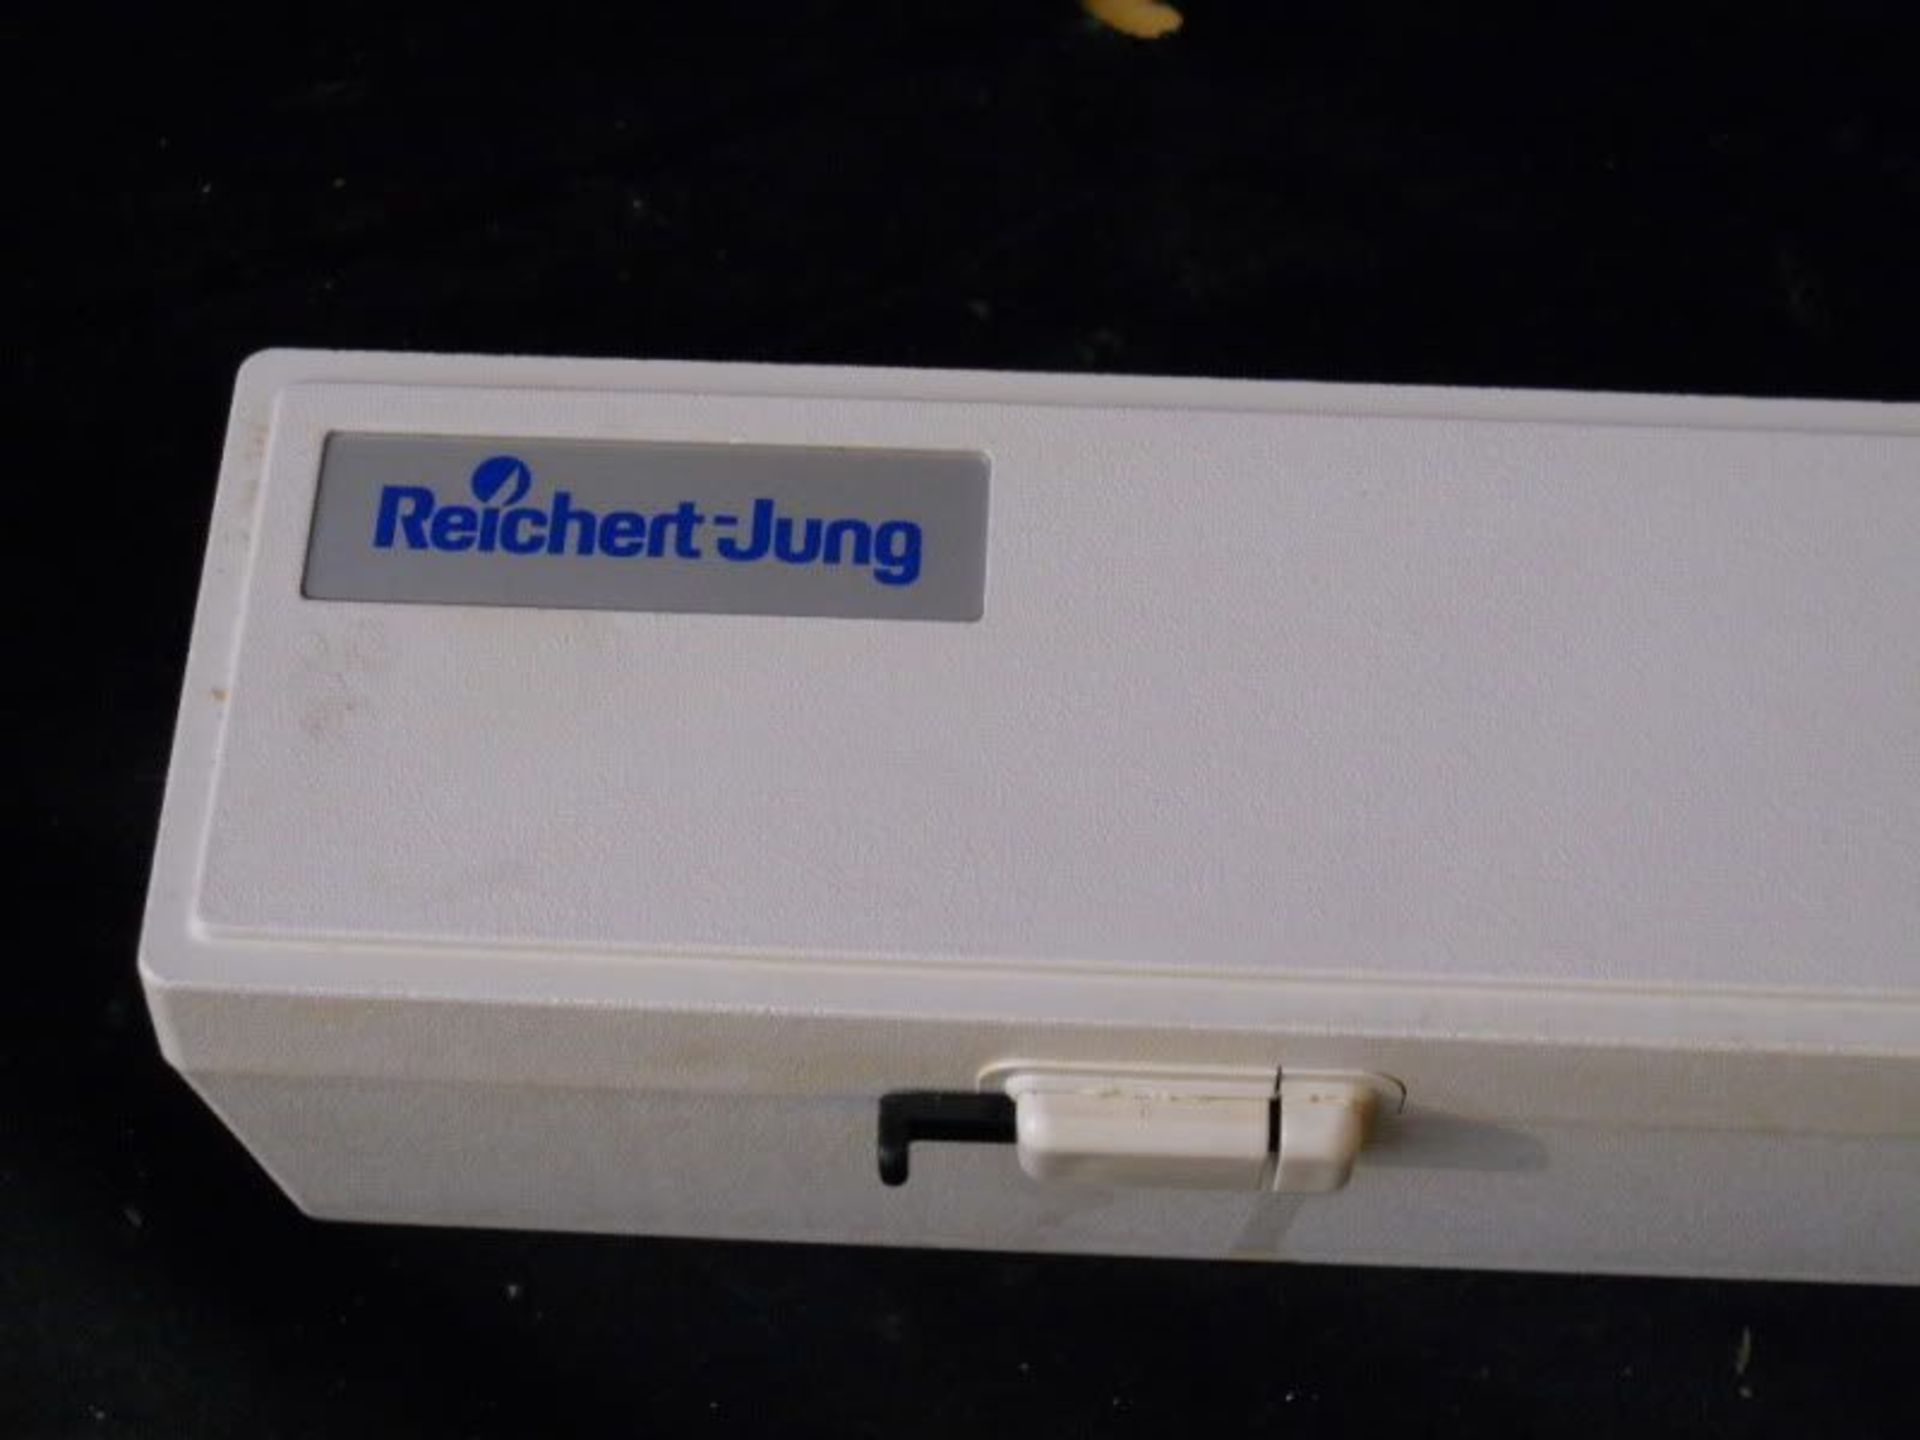 Original Jung Reichert Leica Microtome Knife Blade 300mm, Qty 1, 320951641117 - Image 3 of 8